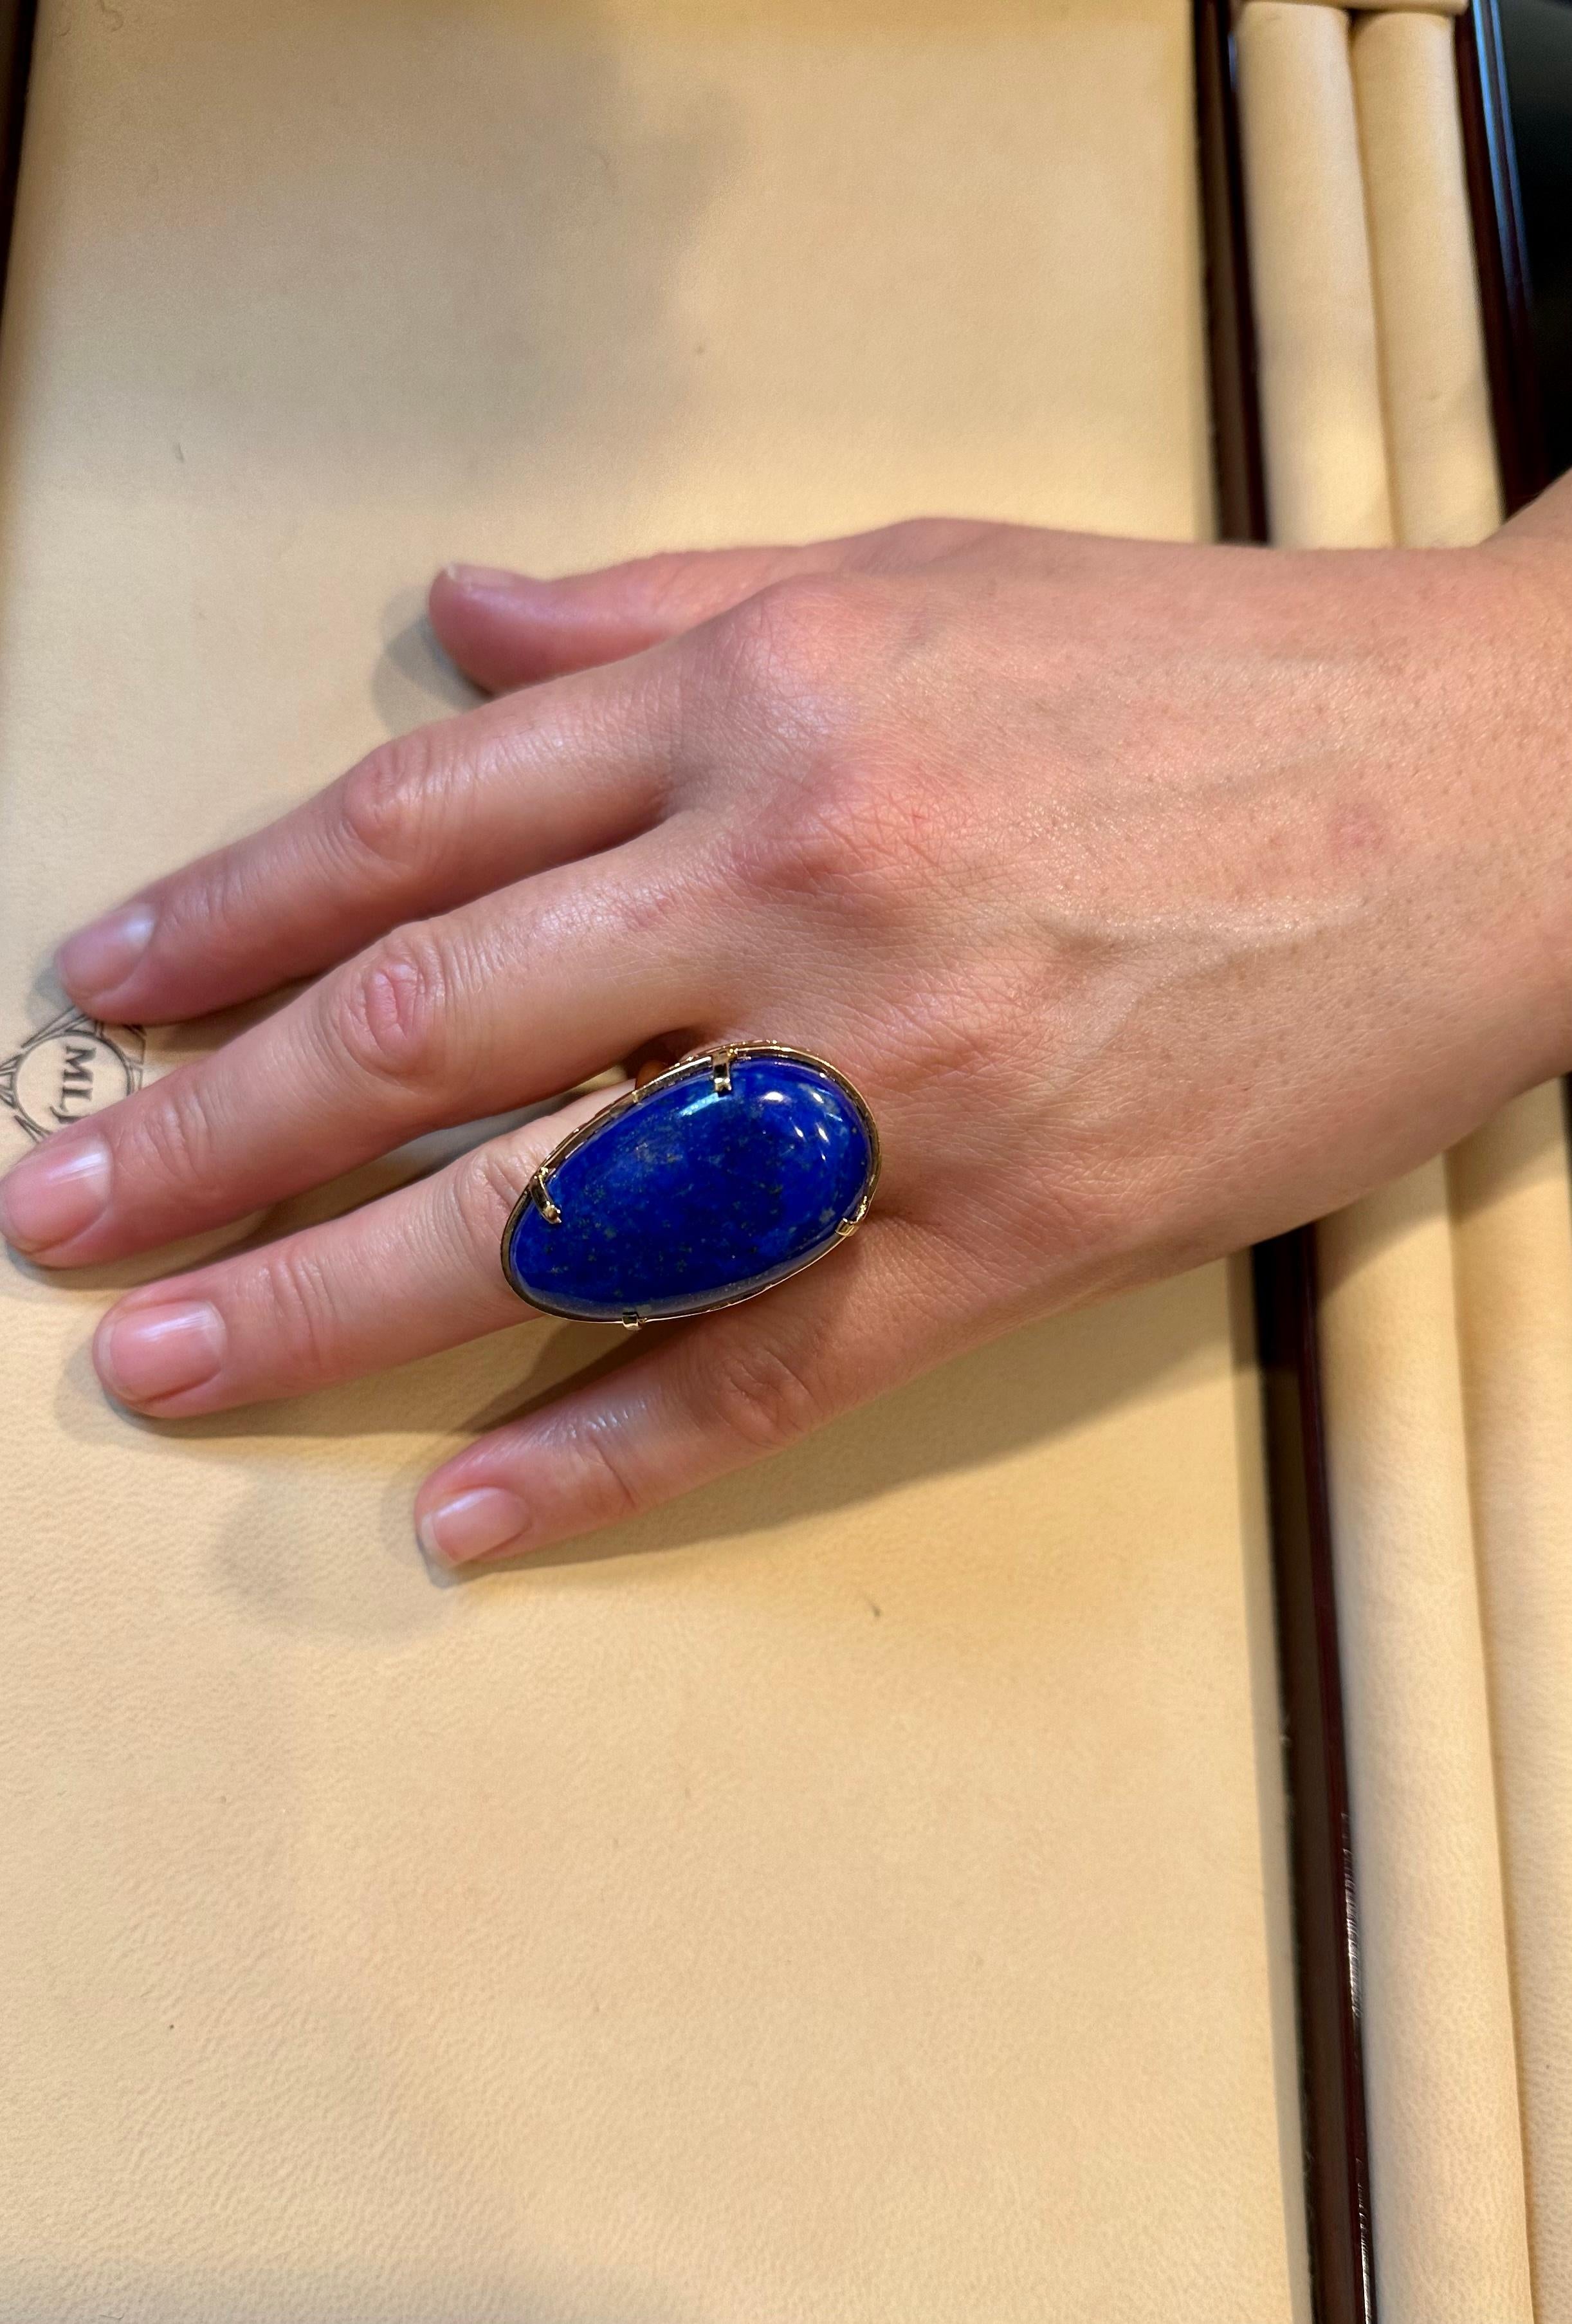 Huge 63 Ct Natural Cabochon Lapis Lazuli Ring in 14 Kt Yellow Gold, Estate For Sale 11